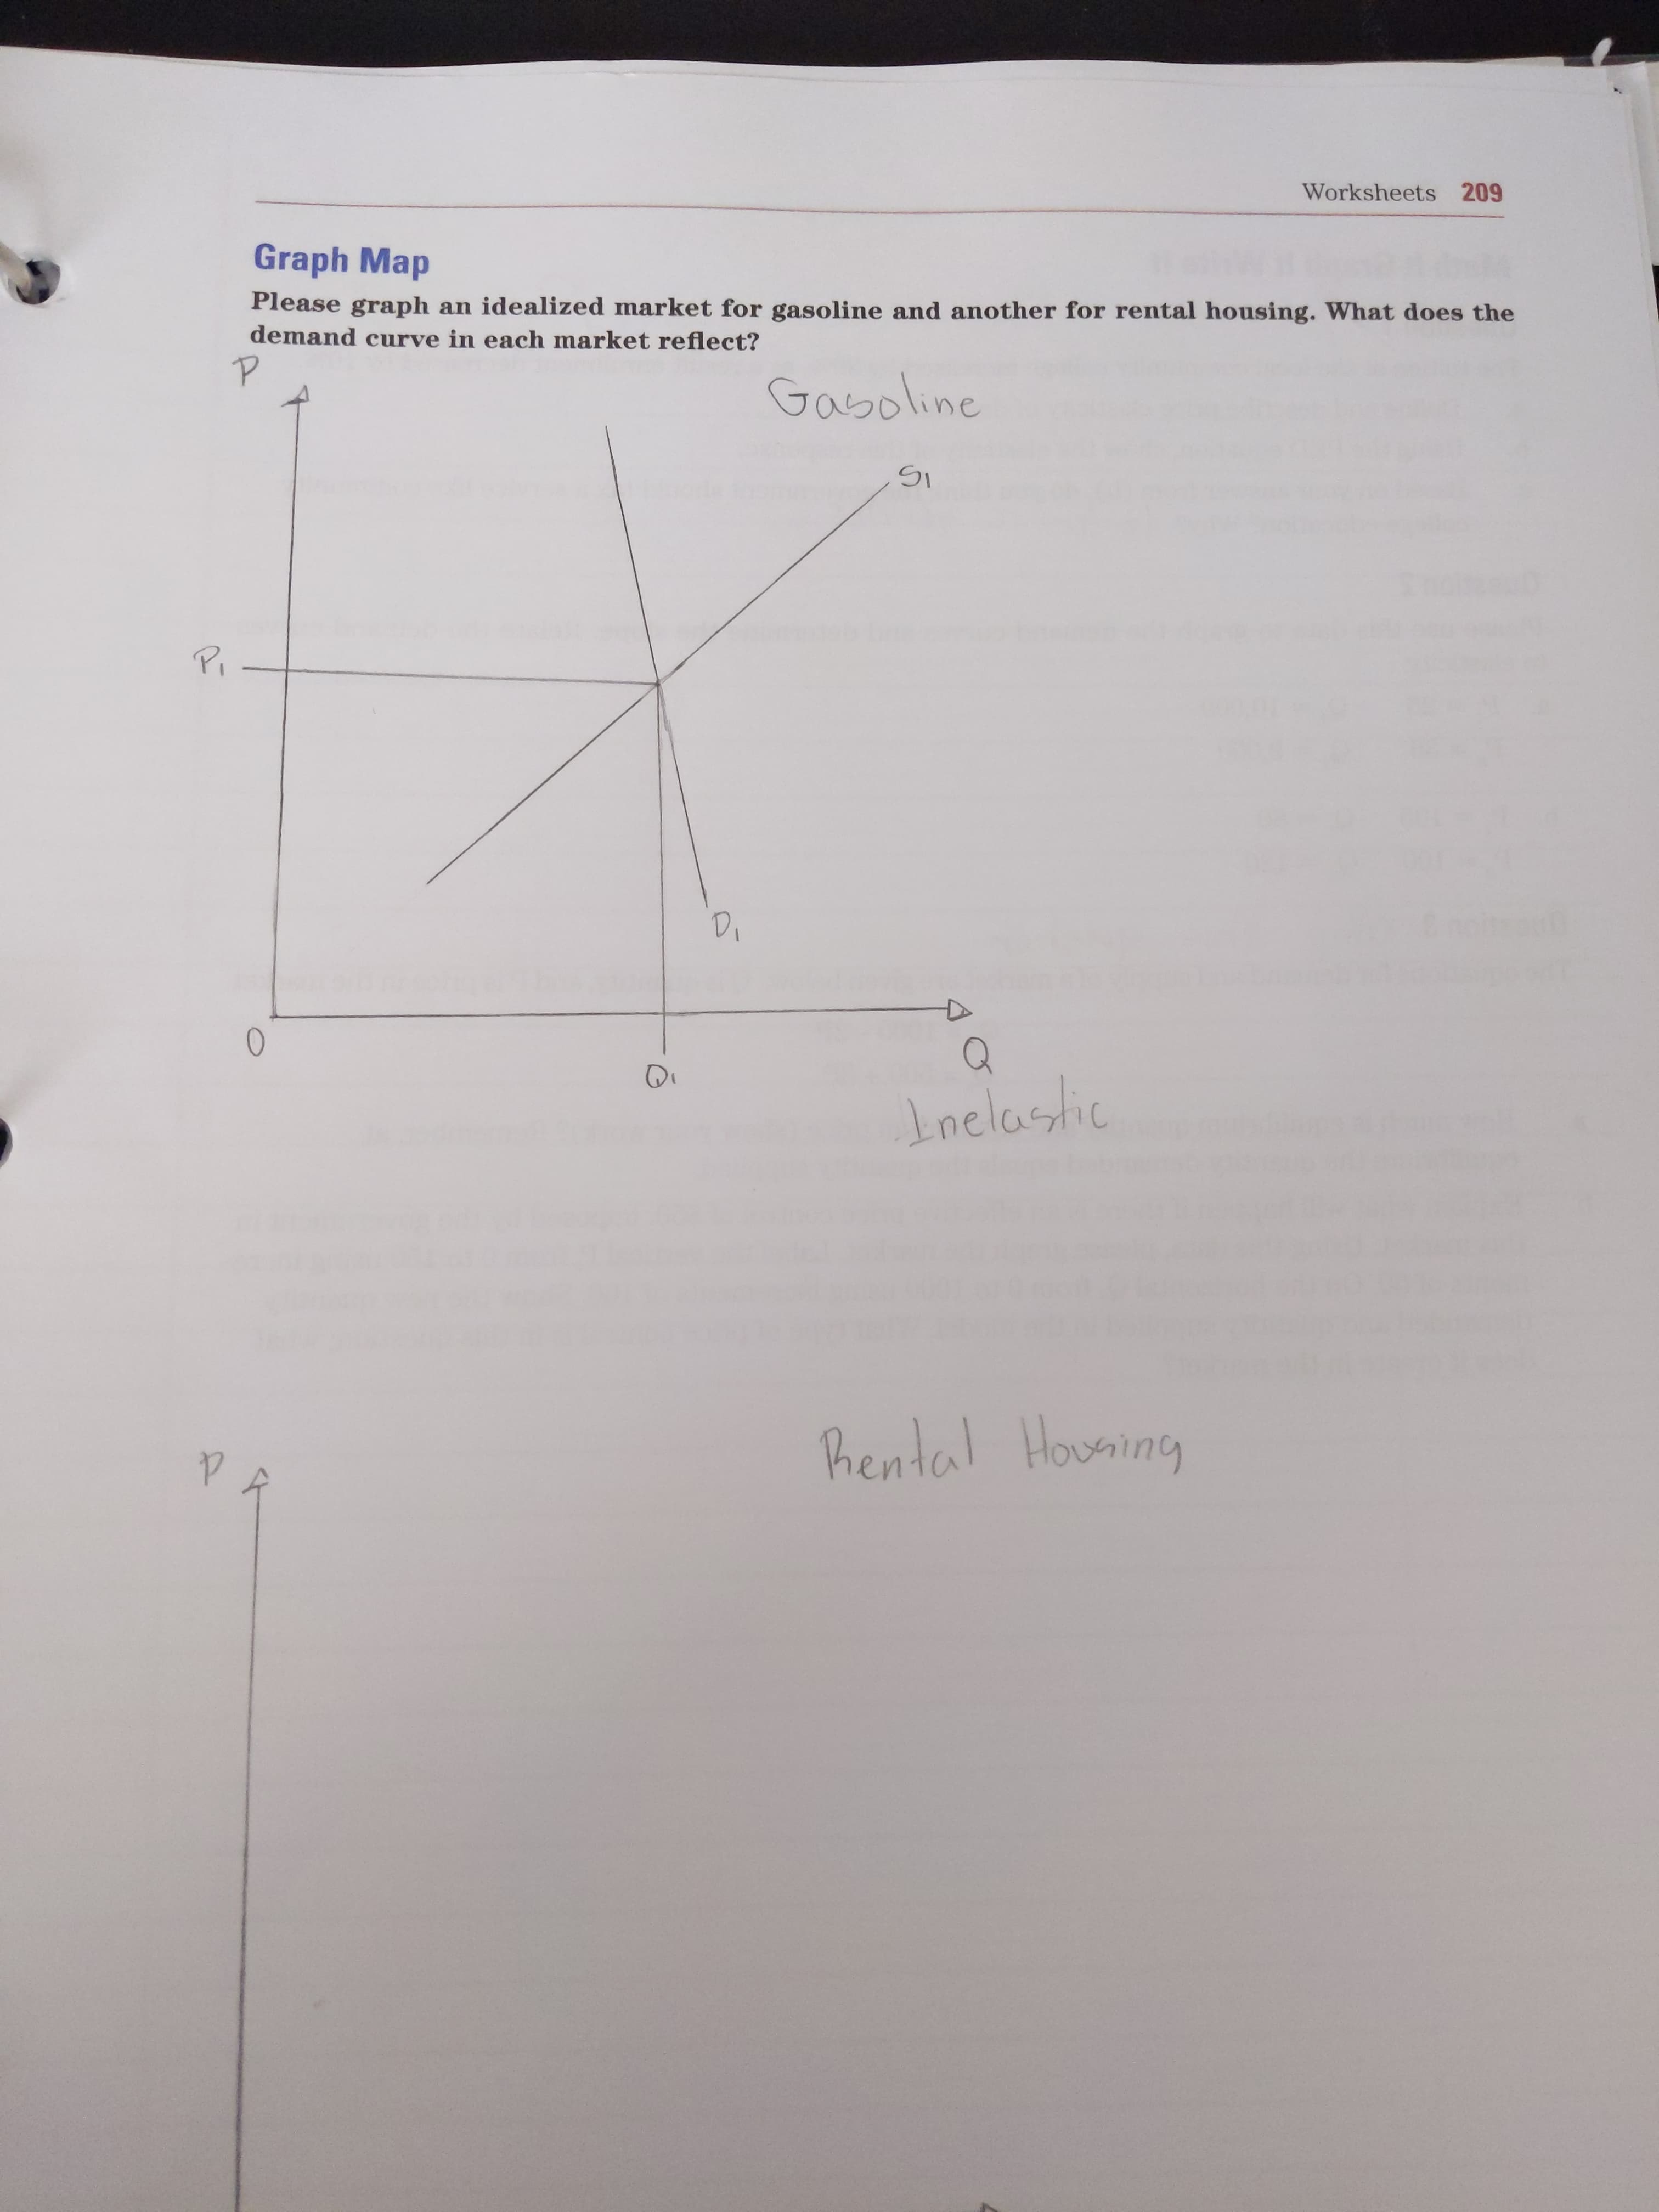 Worksheets 209
Graph Map
Please graph an idealized market for gasoline and another for rental housing. What does the
demand curve in each market reflect?
Gasoline
Pi
Di
Inelashic
Pental Housing
